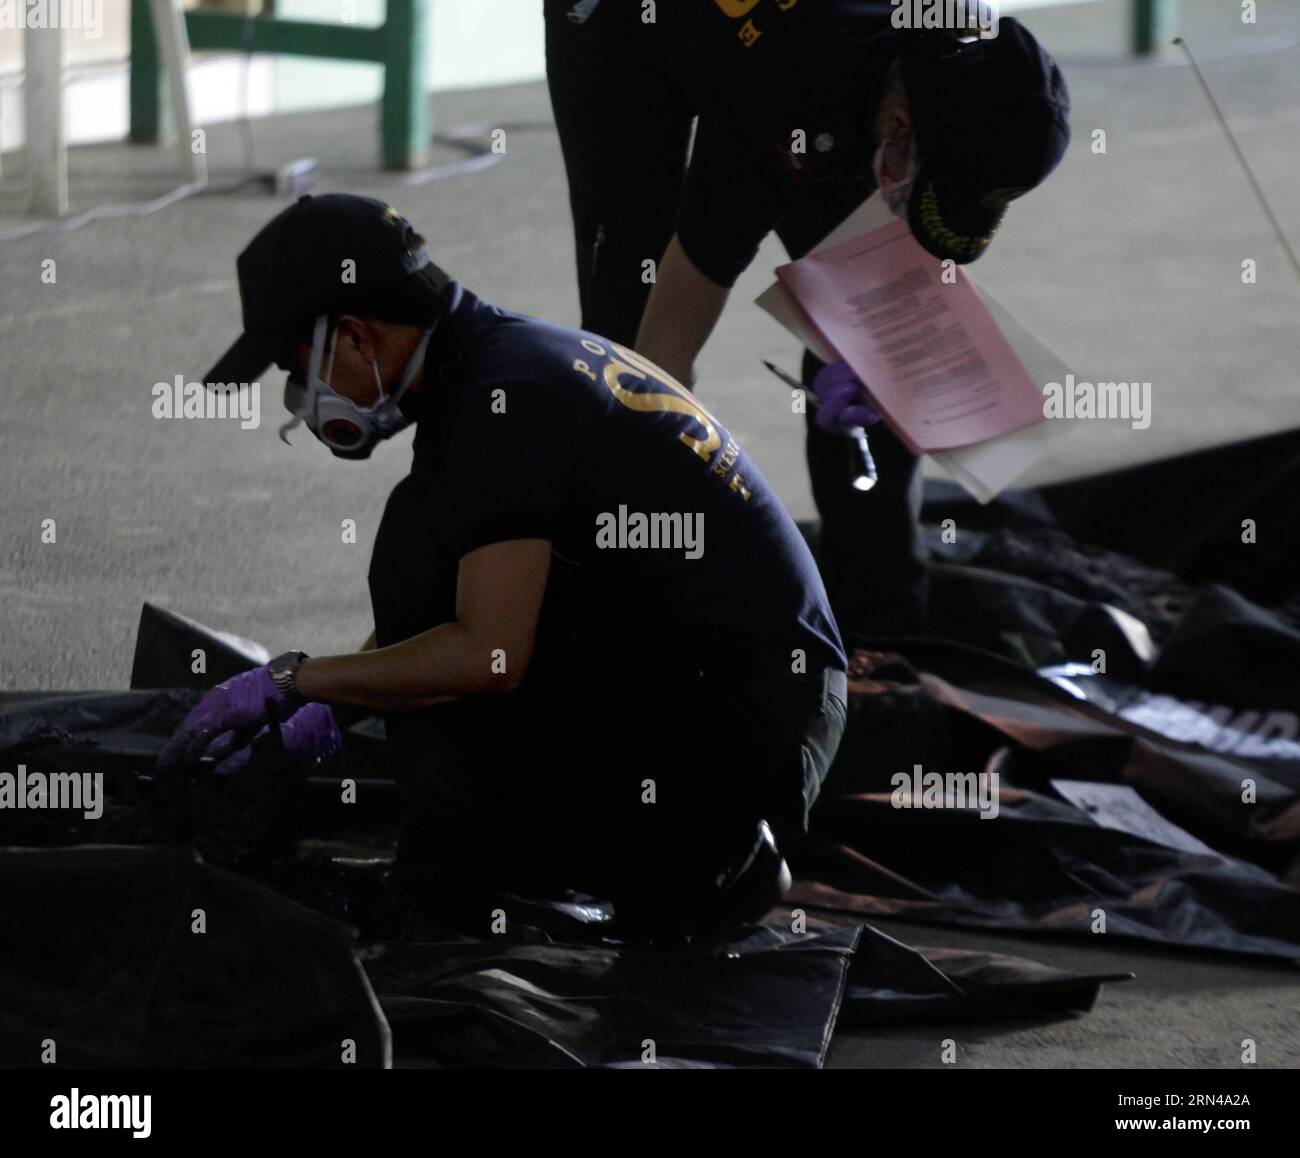 AKTUELLES ZEITGESCHEHEN Brand in Schuhfabrik nahe Manila, Philippinen (150514) -- VALENZUELA CITY, May 14, 2015 -- Members of the Philippine National Police s Scene-of the-Crime Operatives (PNP-SOCO) inspect the bodies of the employees who were killed in a warehouse fire in Valenzuela City, the Philippines, May 14, 2015. Death toll has risen to 72 in a fire that occurred Wednesday noon at a sandals factory in Valenzuela city of Metro Manila, the Philippines, said a senior government official Thursday. ) (zjy) PHILIPPINES-VALENZUELA CITY-FIRE RouellexUmali PUBLICATIONxNOTxINxCHN   News Current Stock Photo